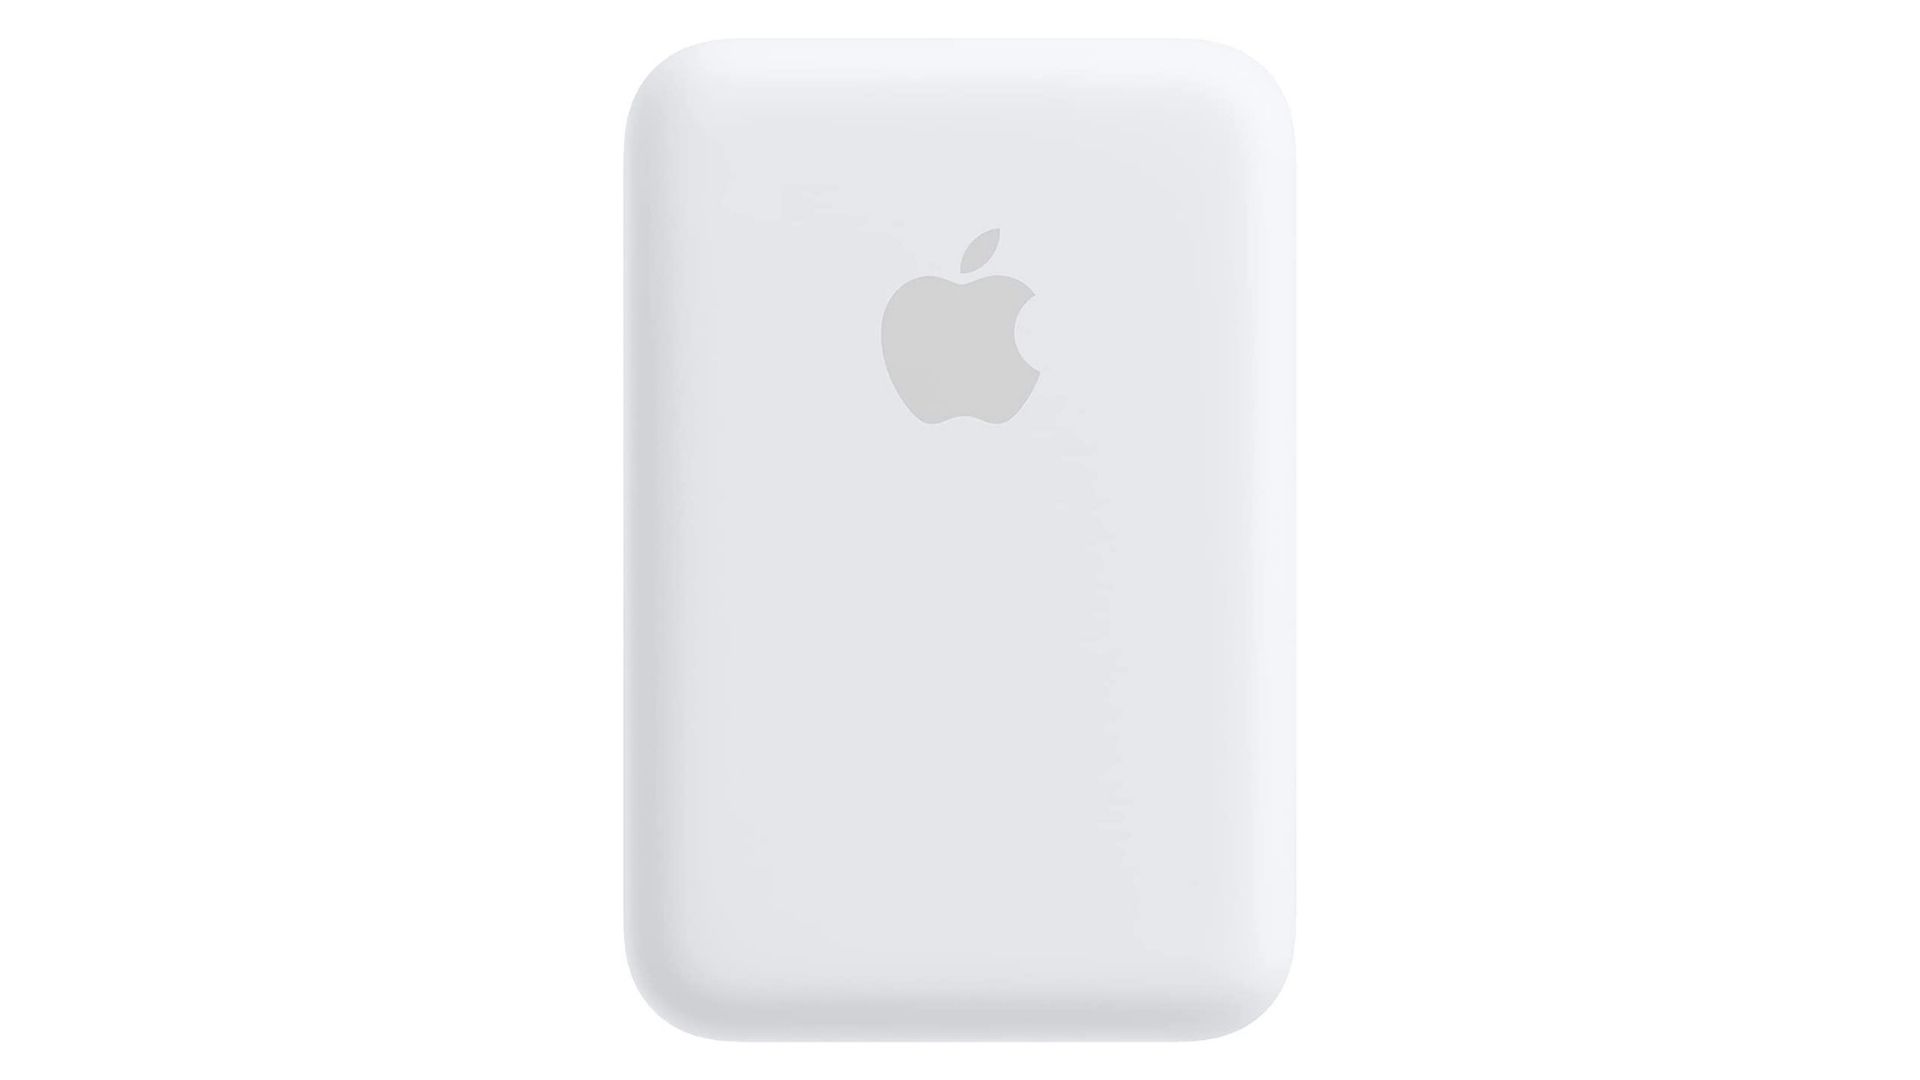 Apple MagSafe Battery Pack - Portable chargers and power banks for iPhone